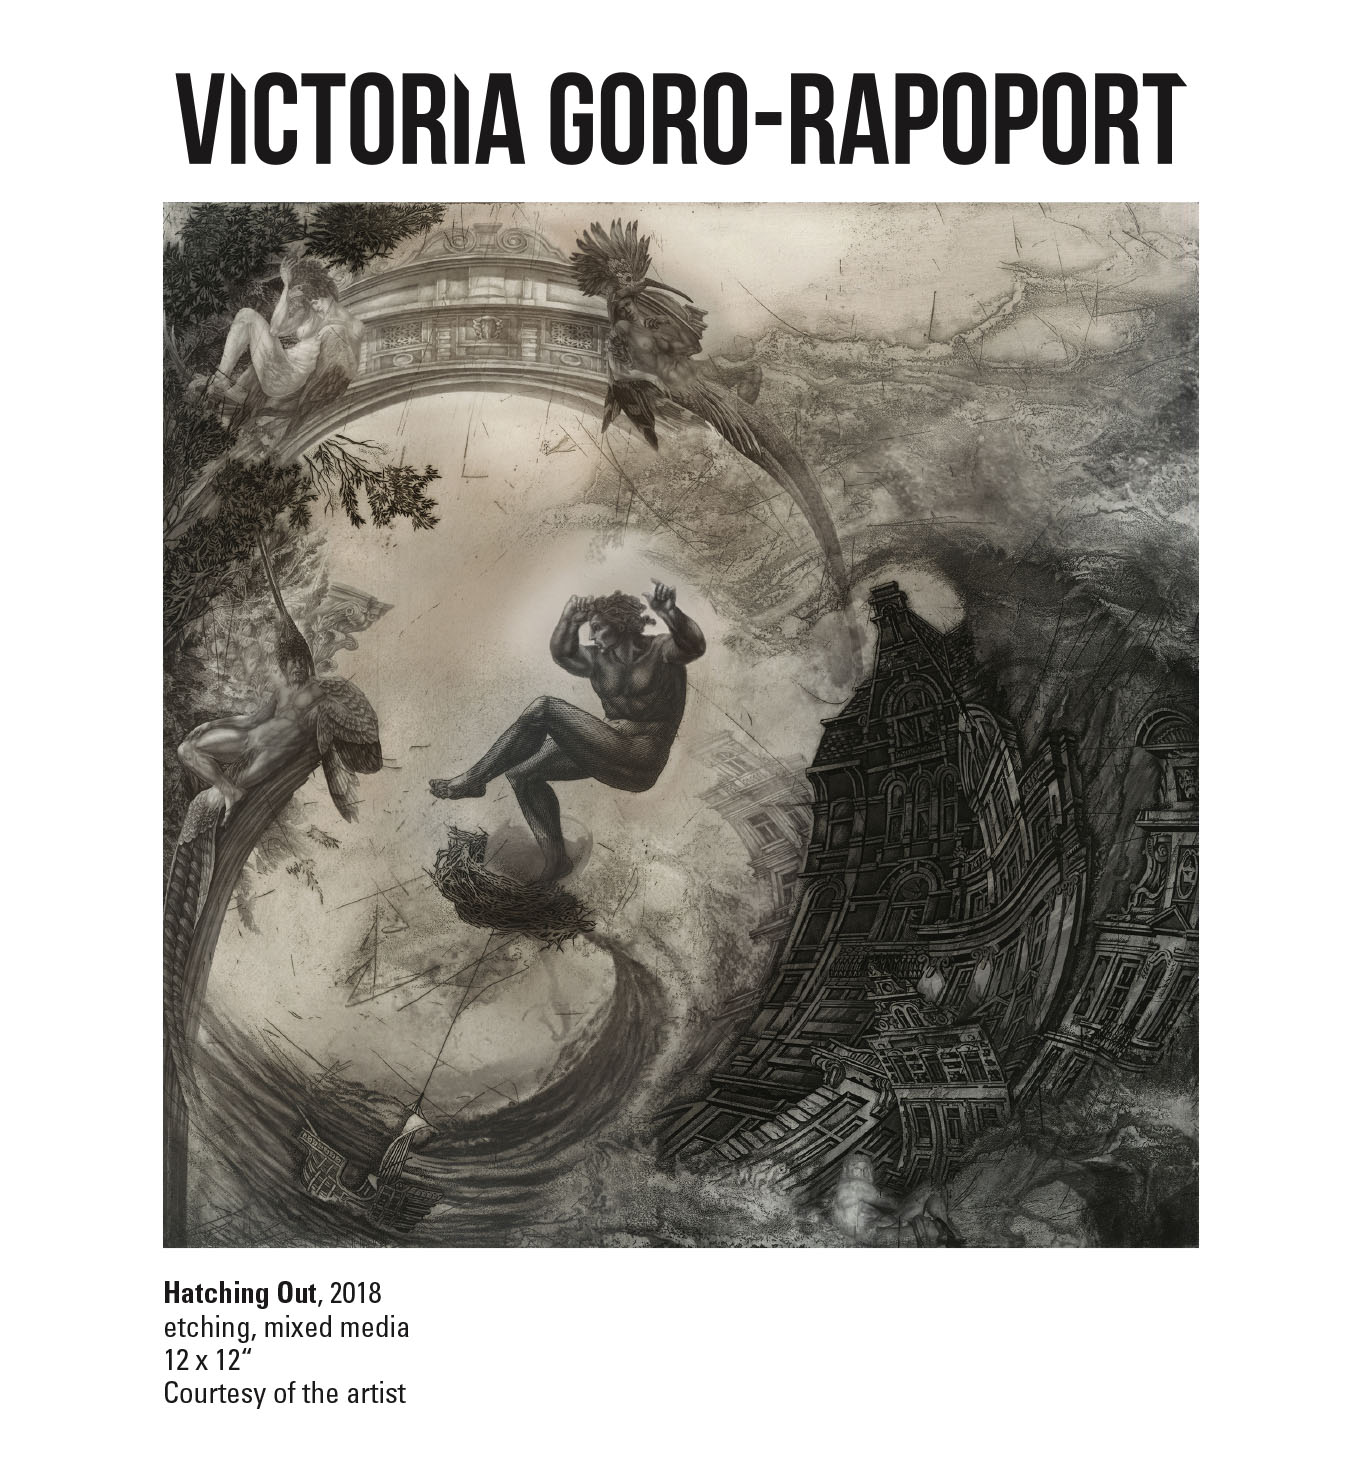 Victoria Goro-Rapoport, Hatching Out, 2018. Etching, mixed media. 12 x 12“ Courtesy of the artist. An etching showing buildings, the ocean, and mixed animal beings in a distorted spiral motion